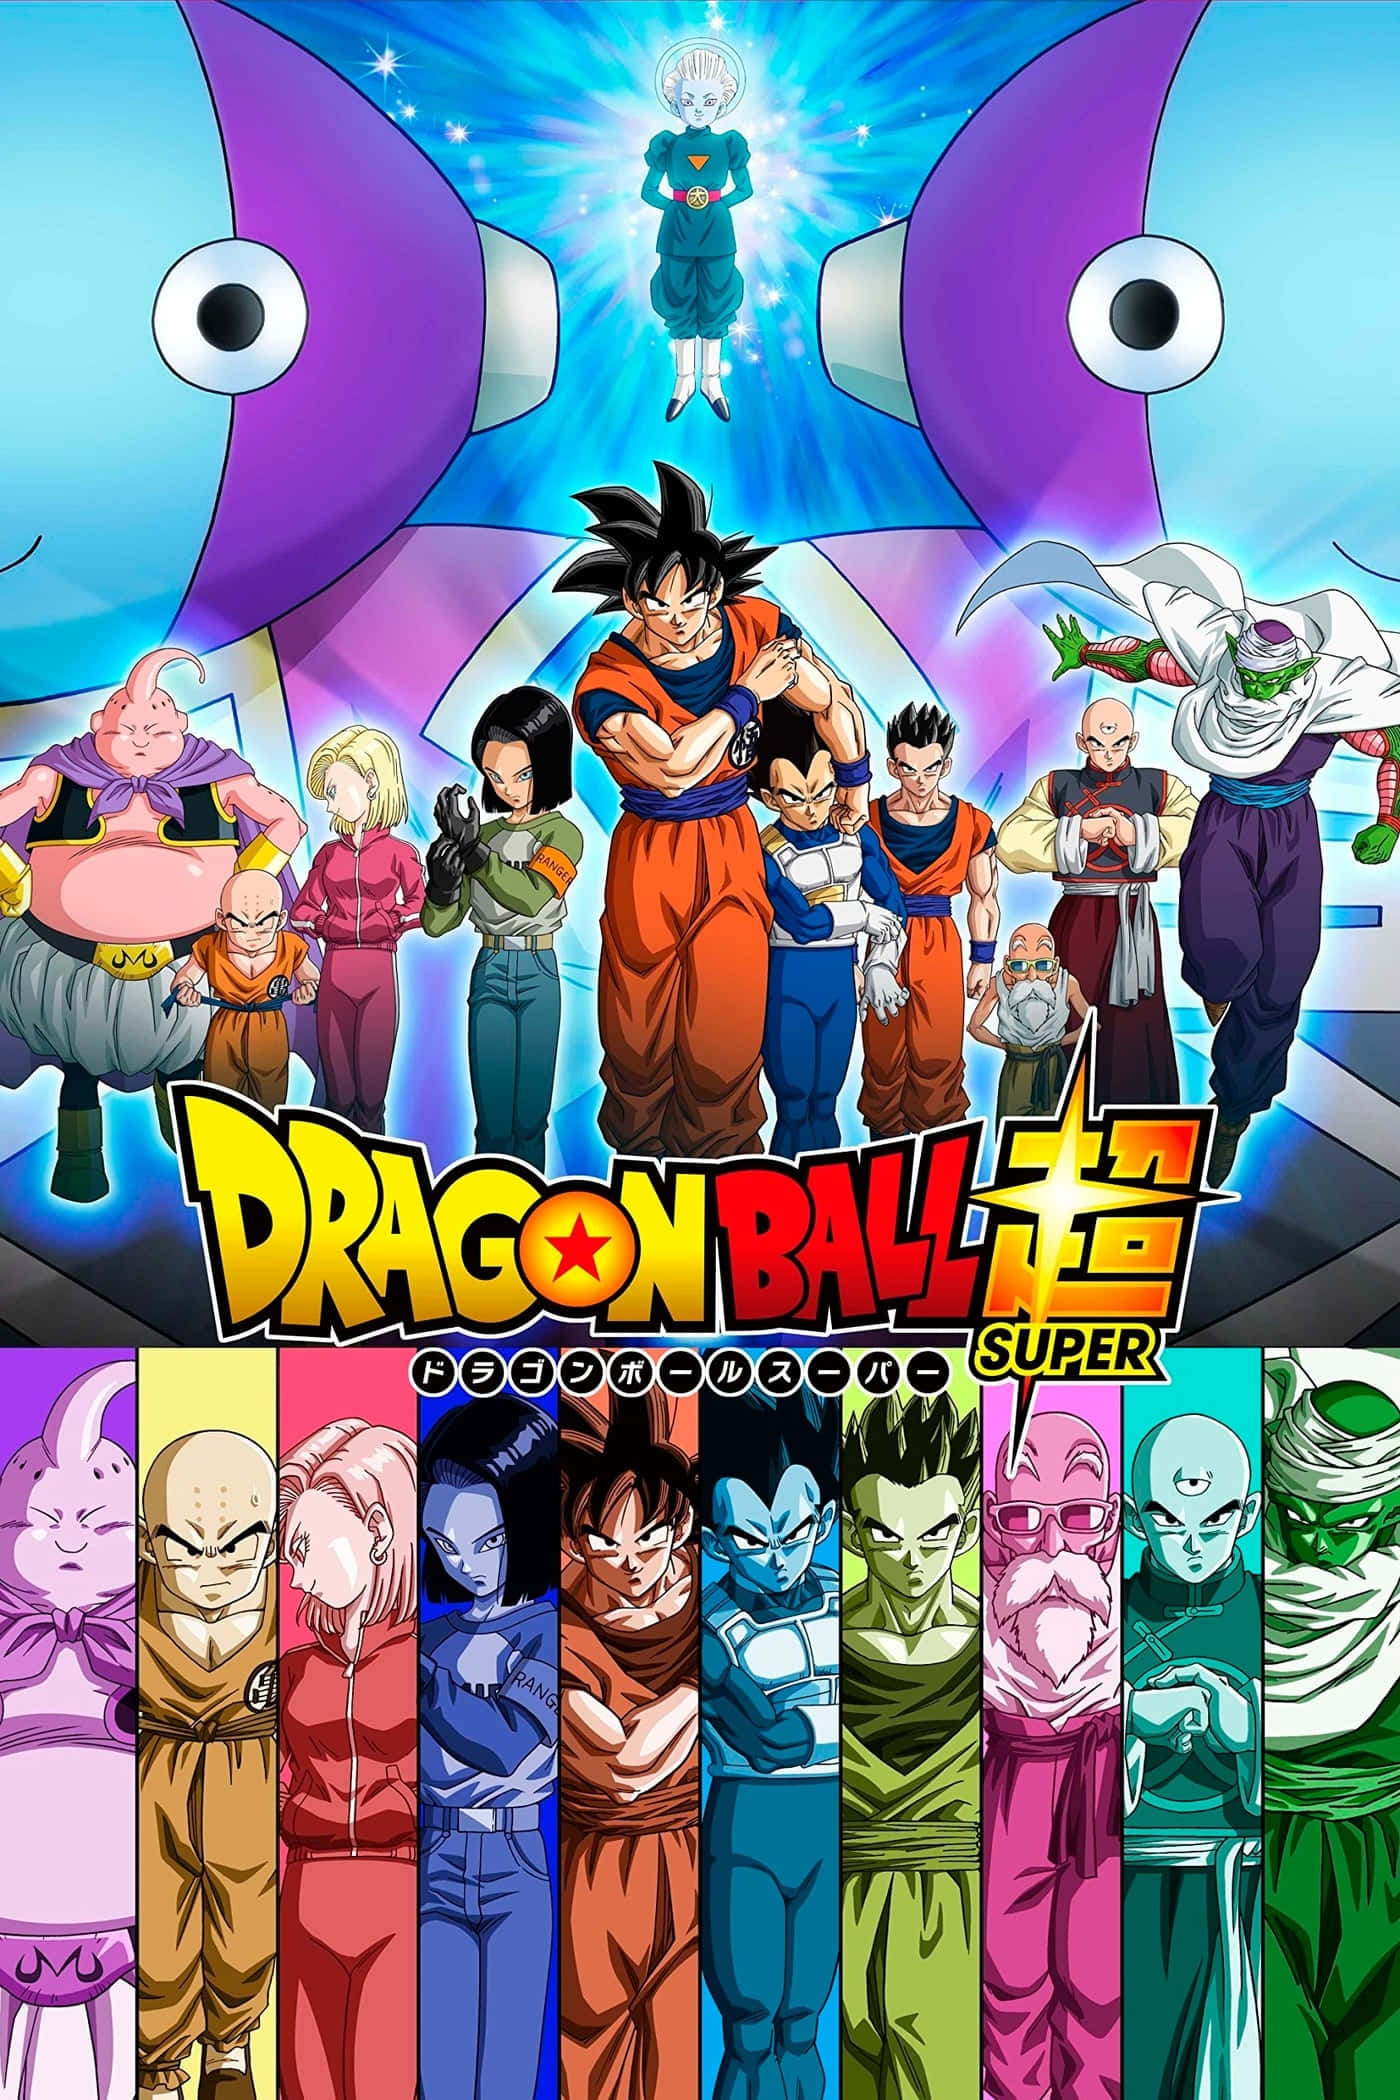 Celebrating the release of the new Dragon Ball Super: Broly movie. Wallpaper